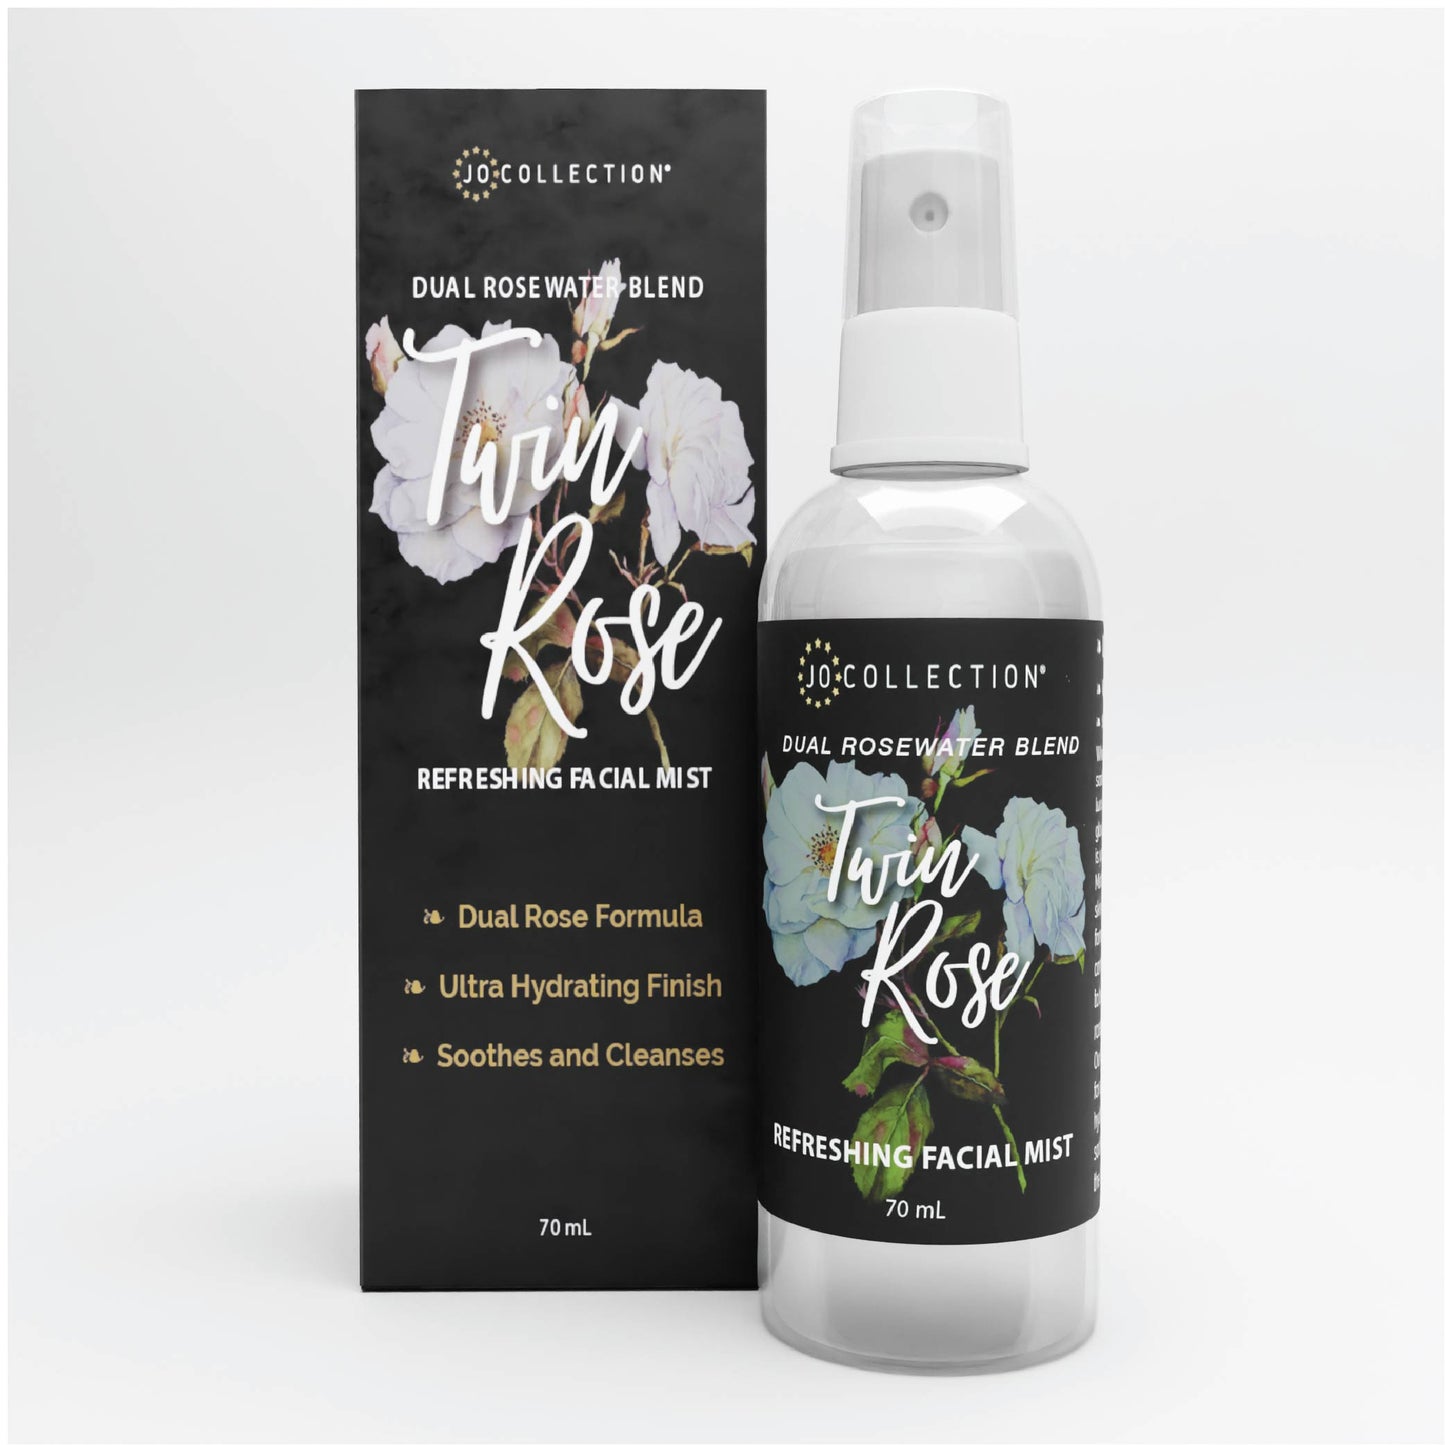 Twin rose facial mist by The Jo Collection - Made in the USA